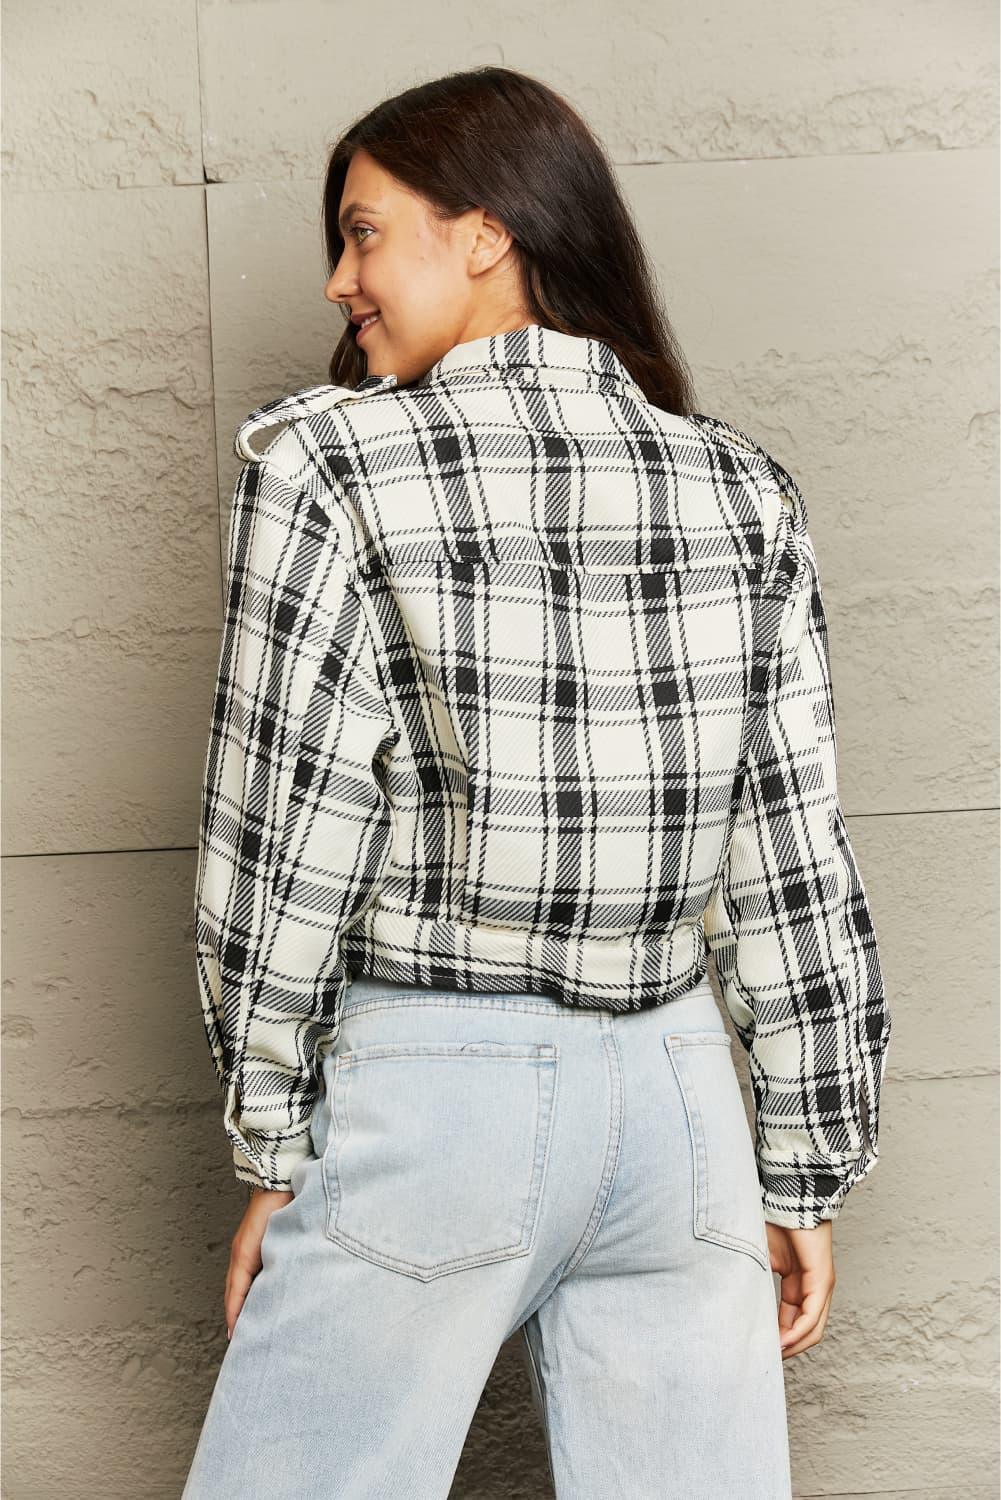 Hit The Street In Style Collared Plaid Shacket - MXSTUDIO.COM